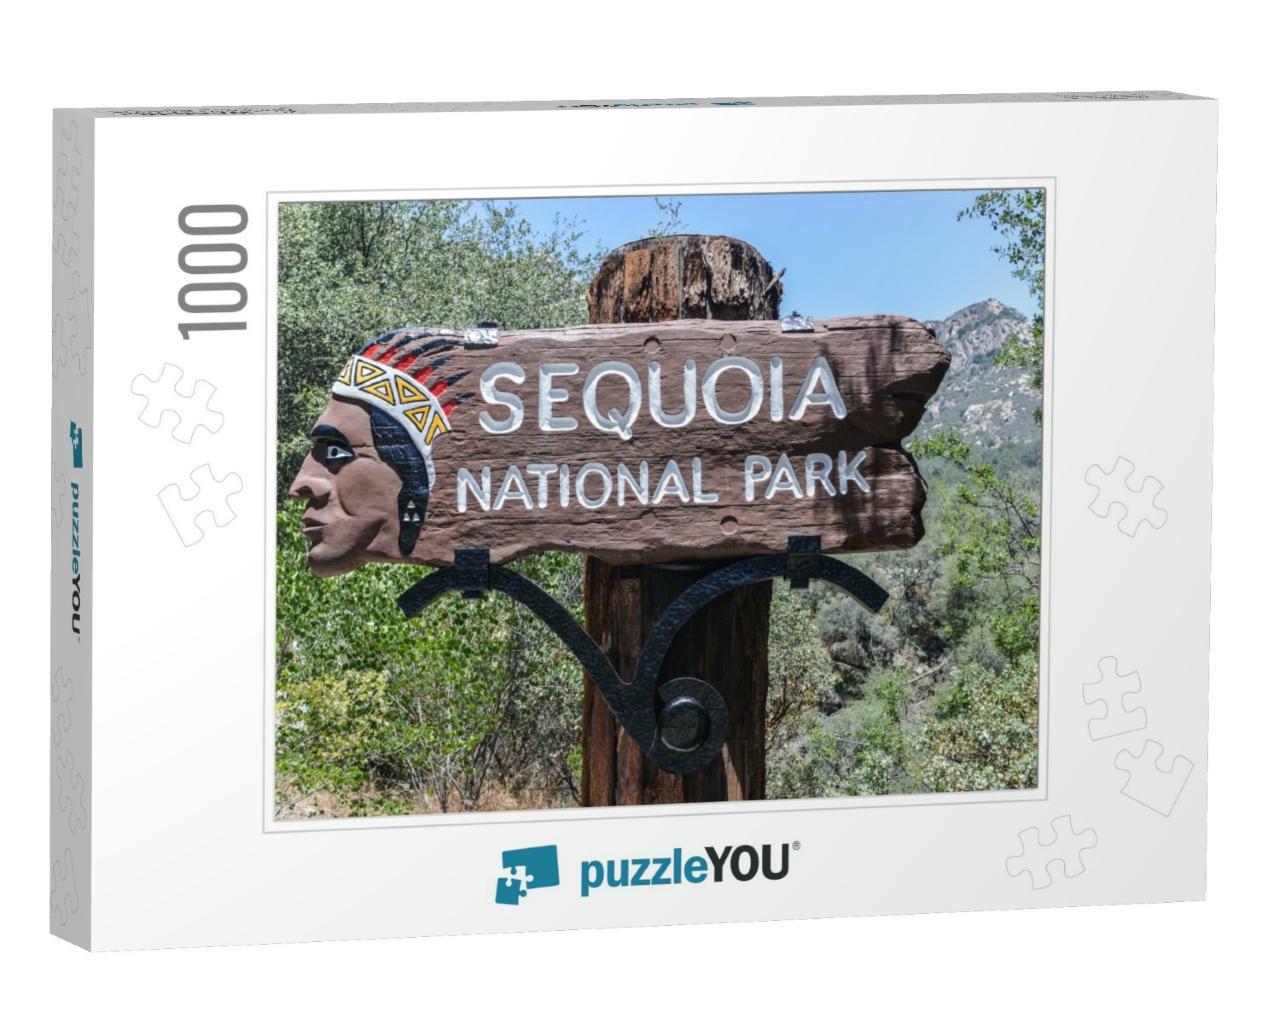 Sign to the Entrance of Sequoia National Park, California... Jigsaw Puzzle with 1000 pieces